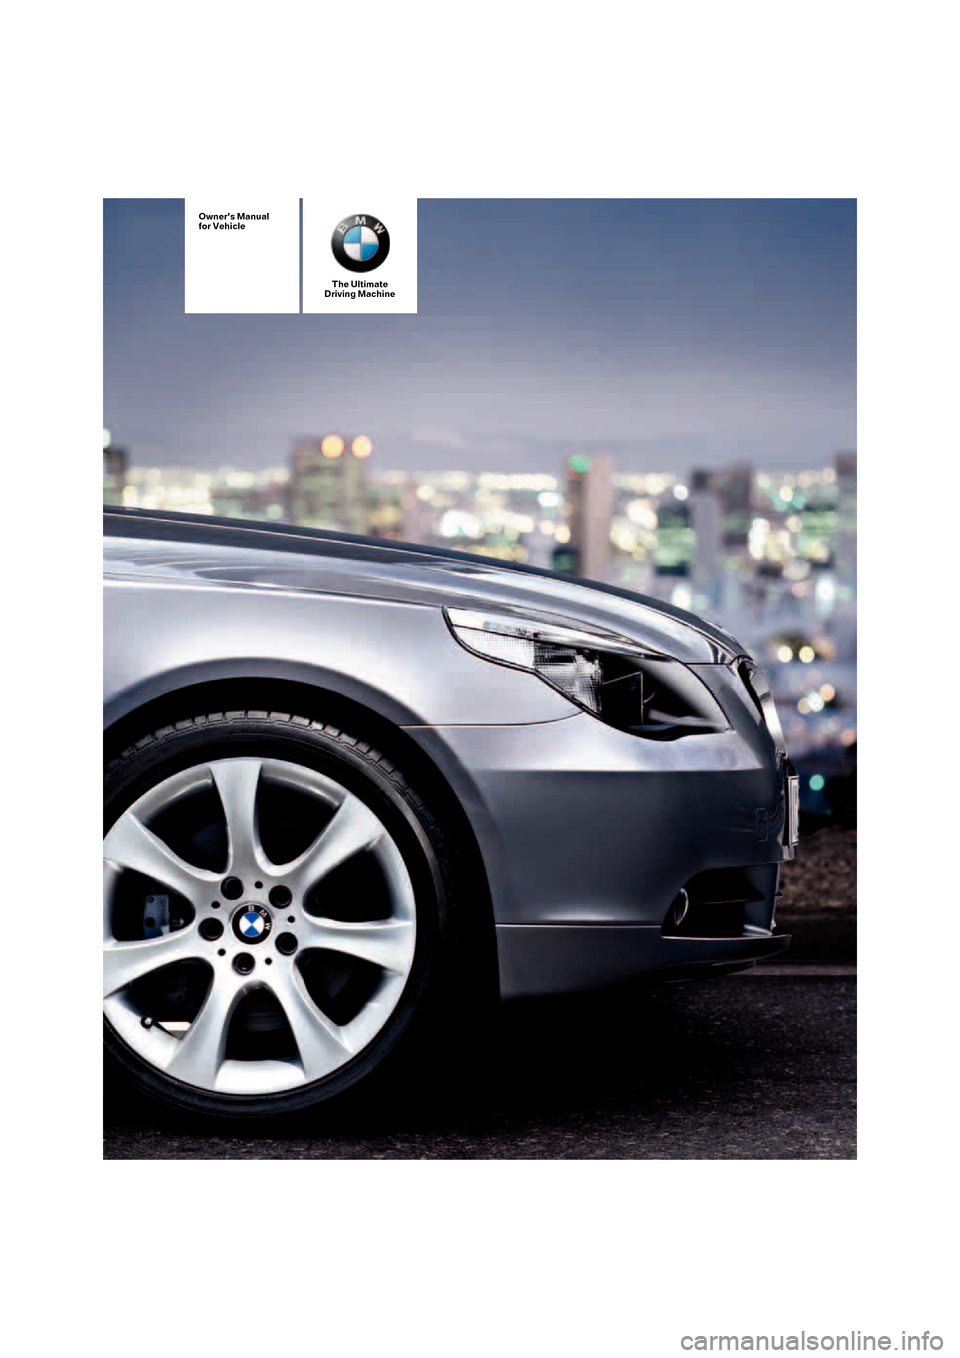 BMW 530I TOURING 2006 E61 Owners Manual The Ultimate
Driving Machine
Owners Manual
for Vehicle 